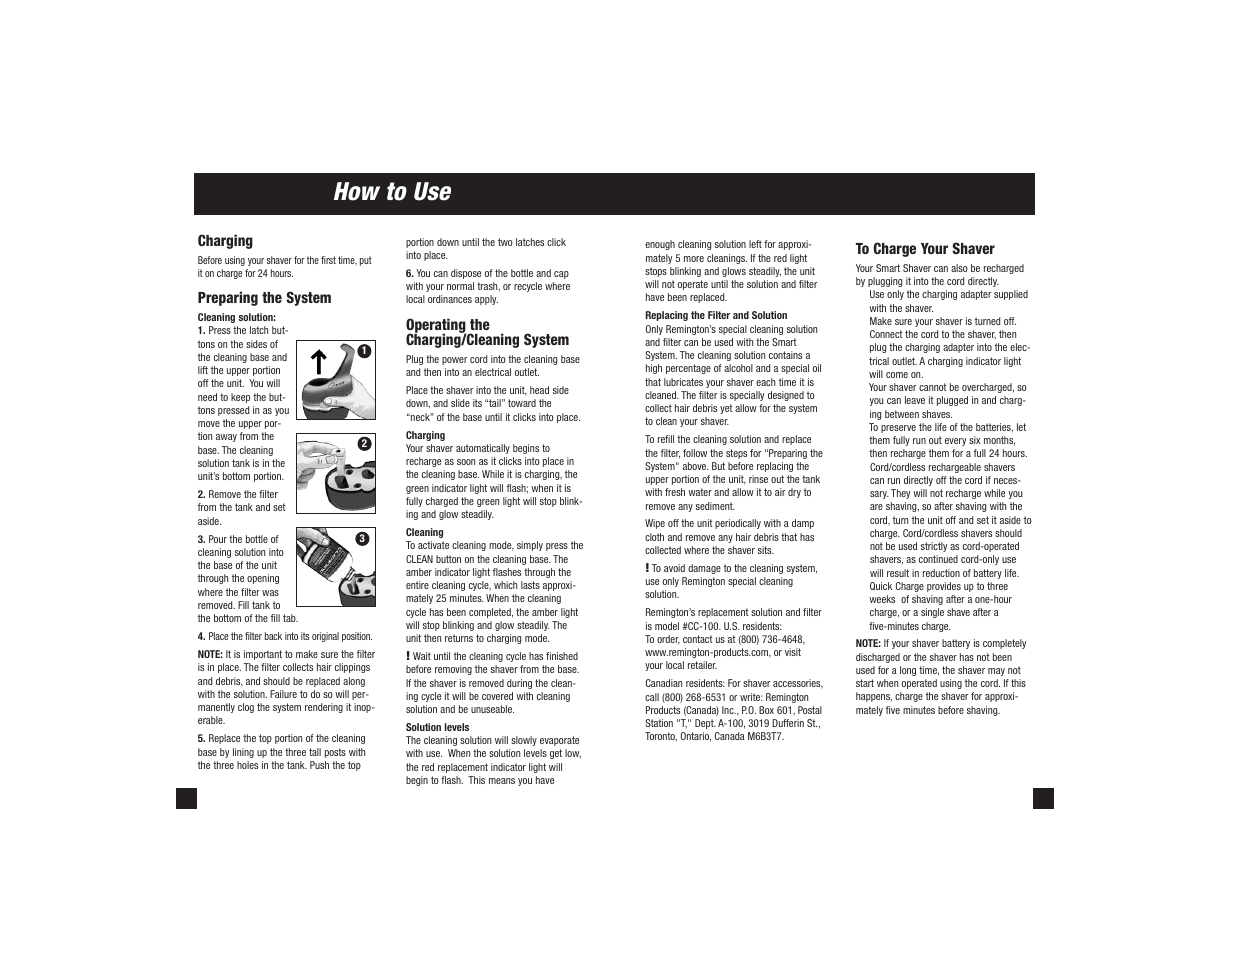 How to use | Remington R-9500 User Manual | Page 5 / 25